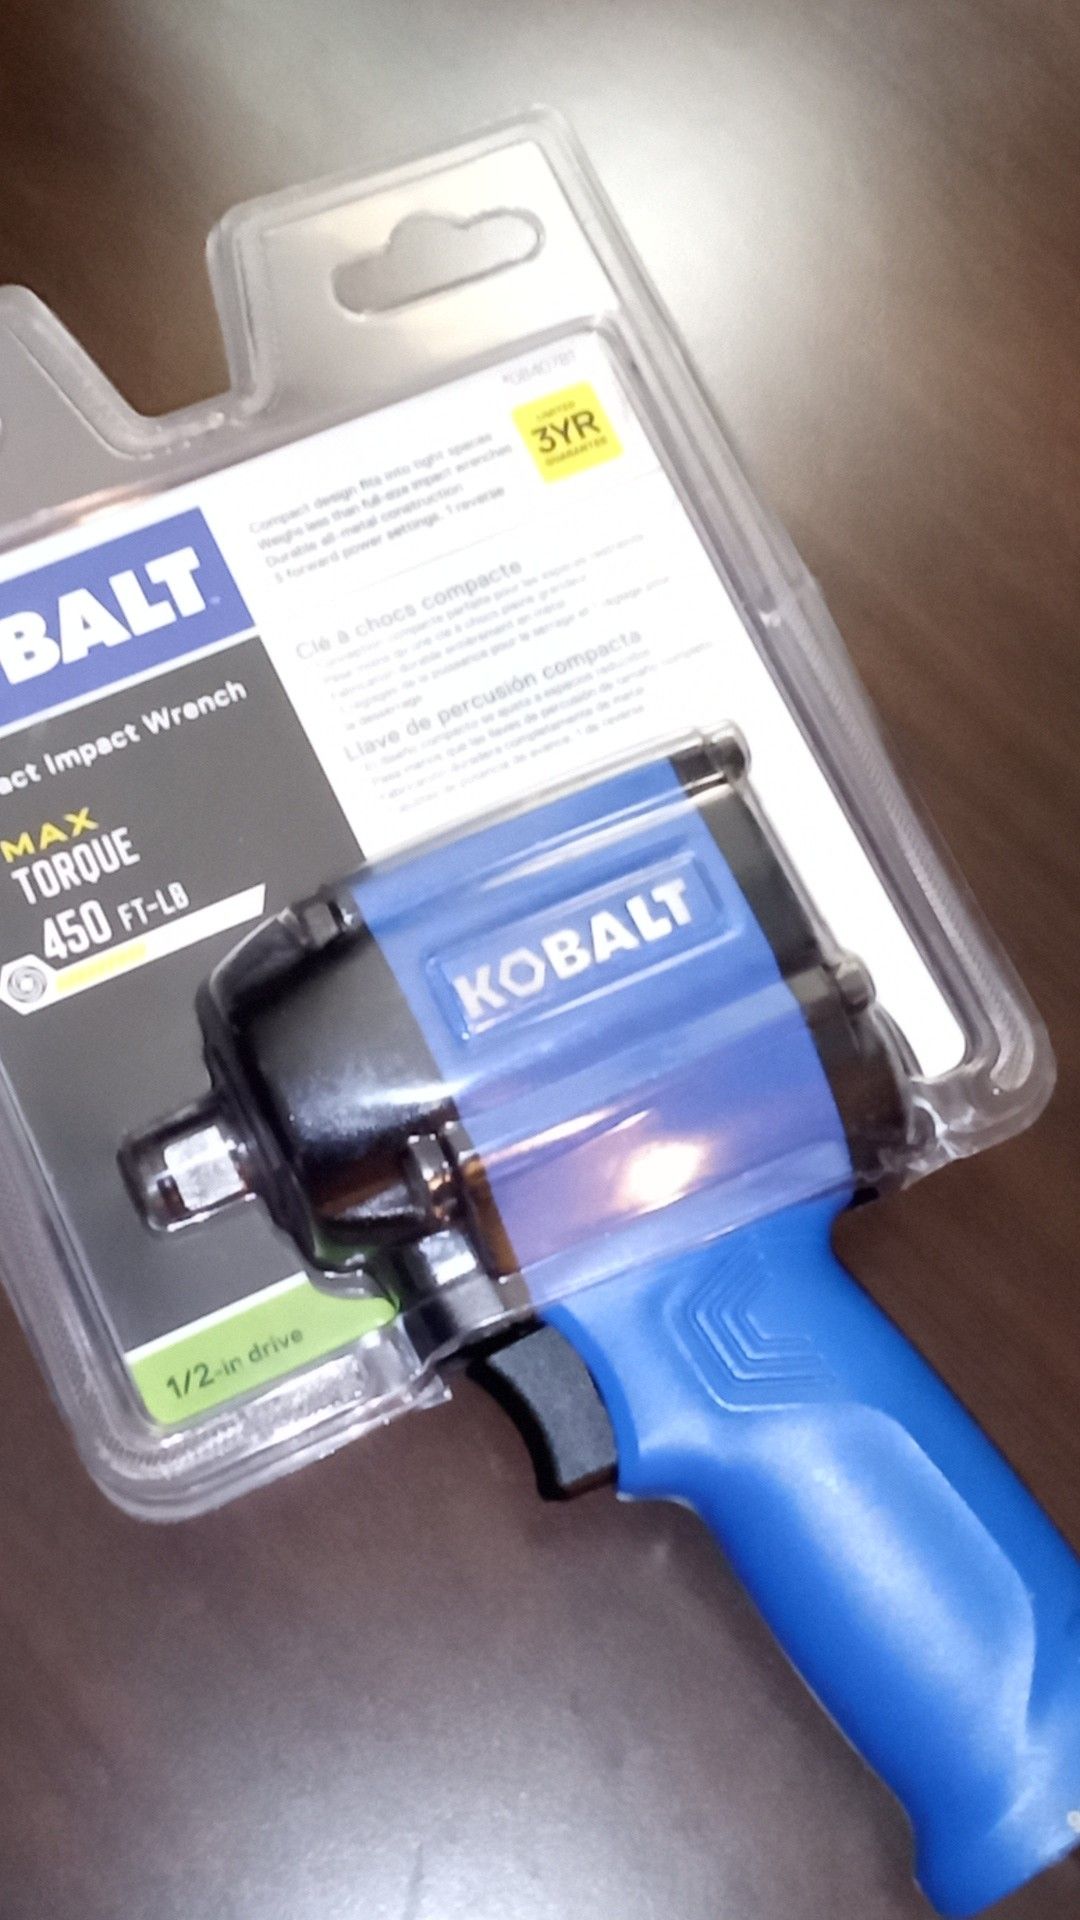 Cobalt compact impact wrench Max torque half inch drive